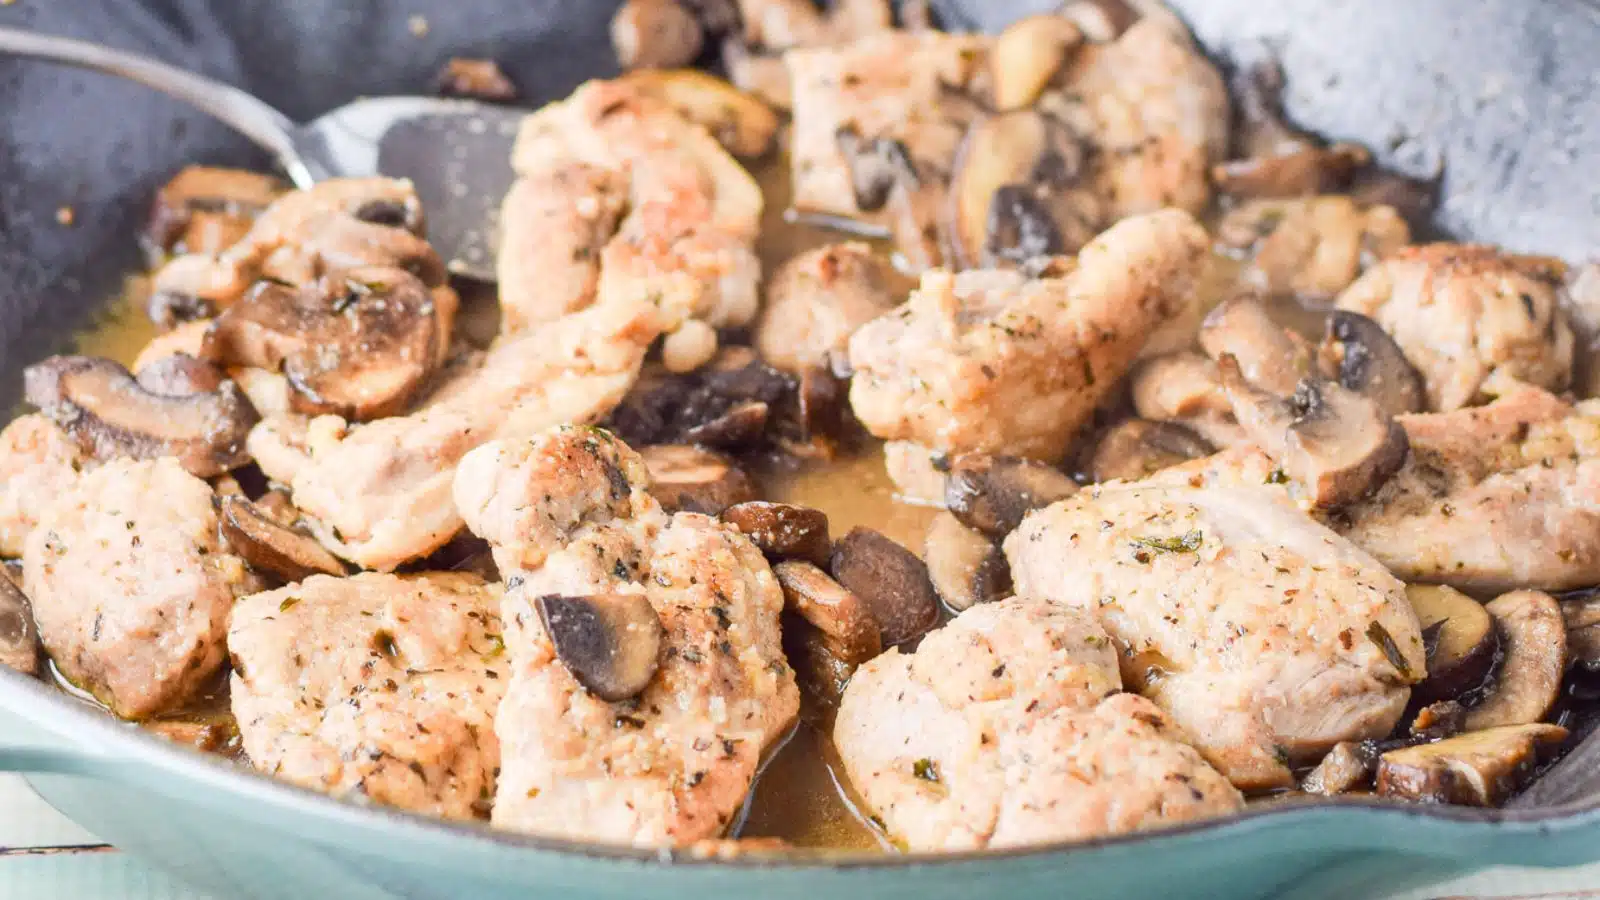 a close up view of chicken pieces in a pan with mushrooms and sauce